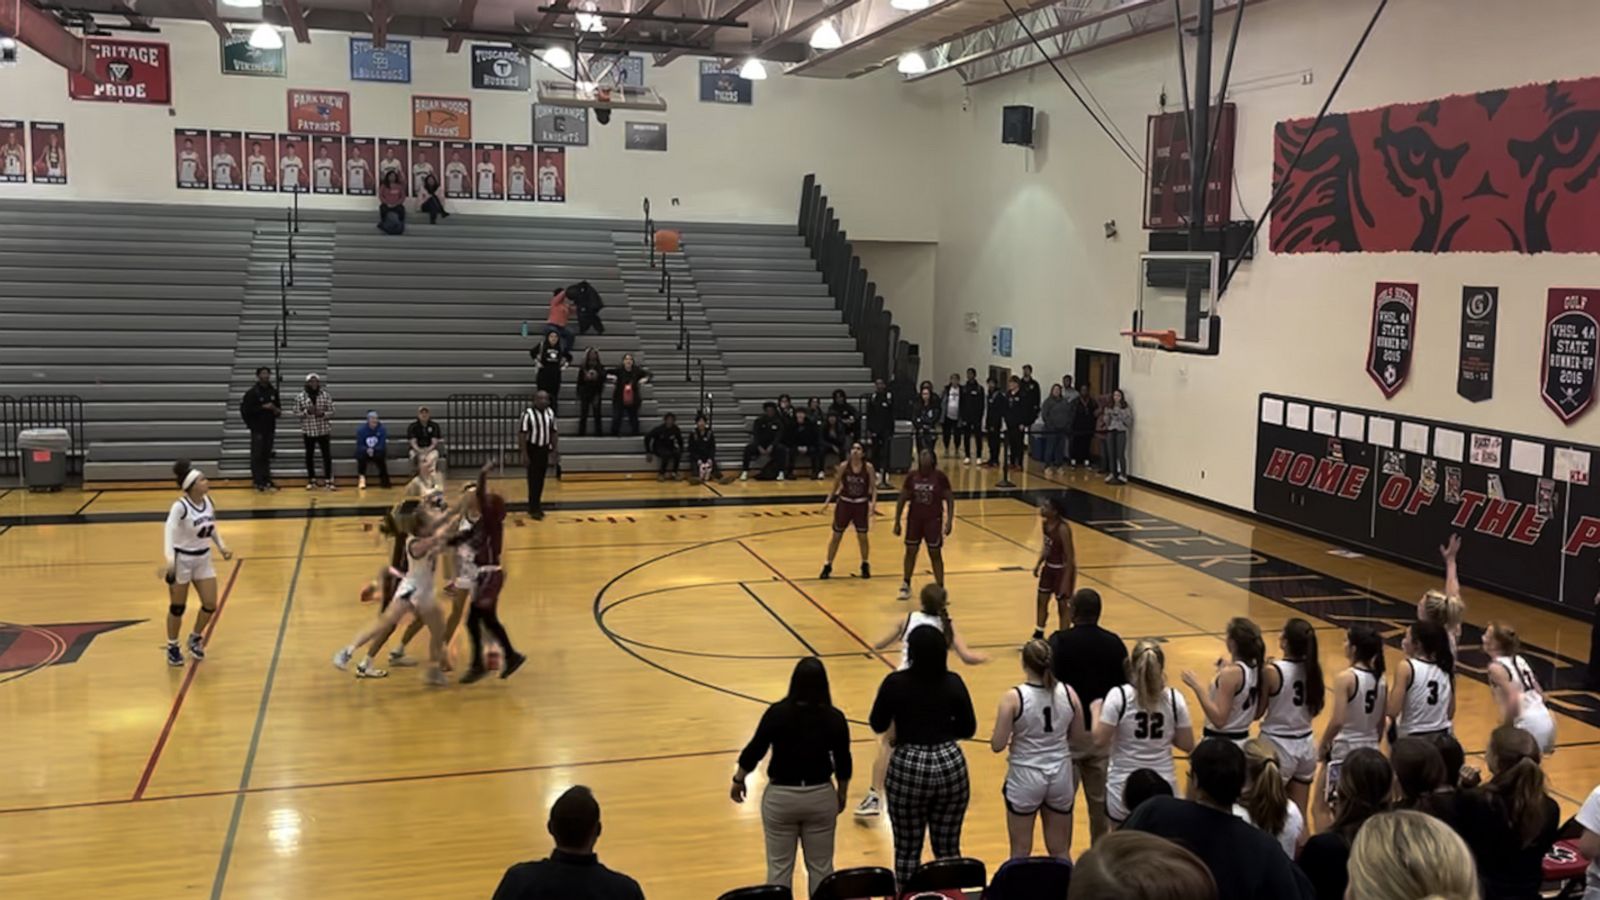 Eighth-grader wows the crowd with an impressive buzzer-beater shot